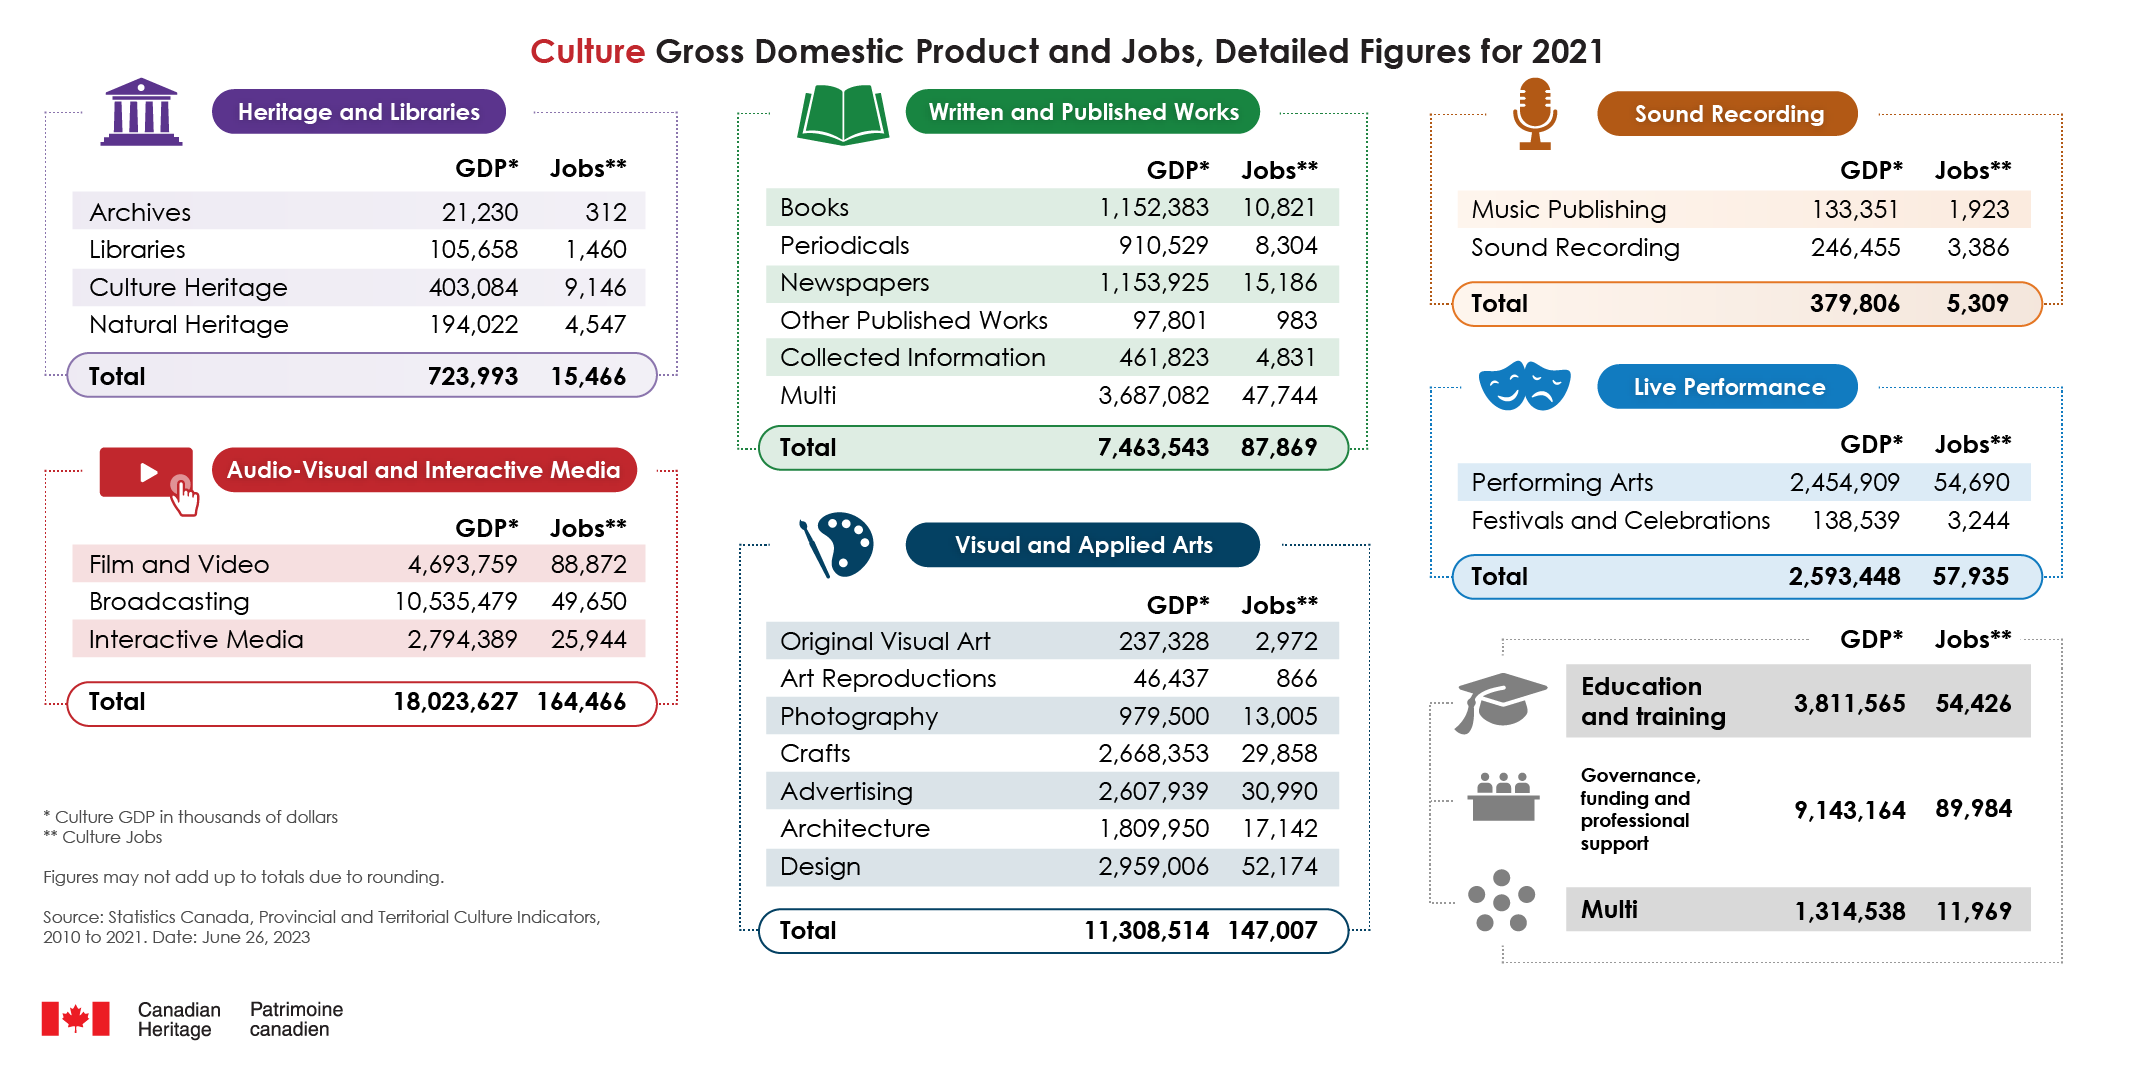 Infographic of Culture Gross Domestic Product and Jobs, Detailed Figures for 2021